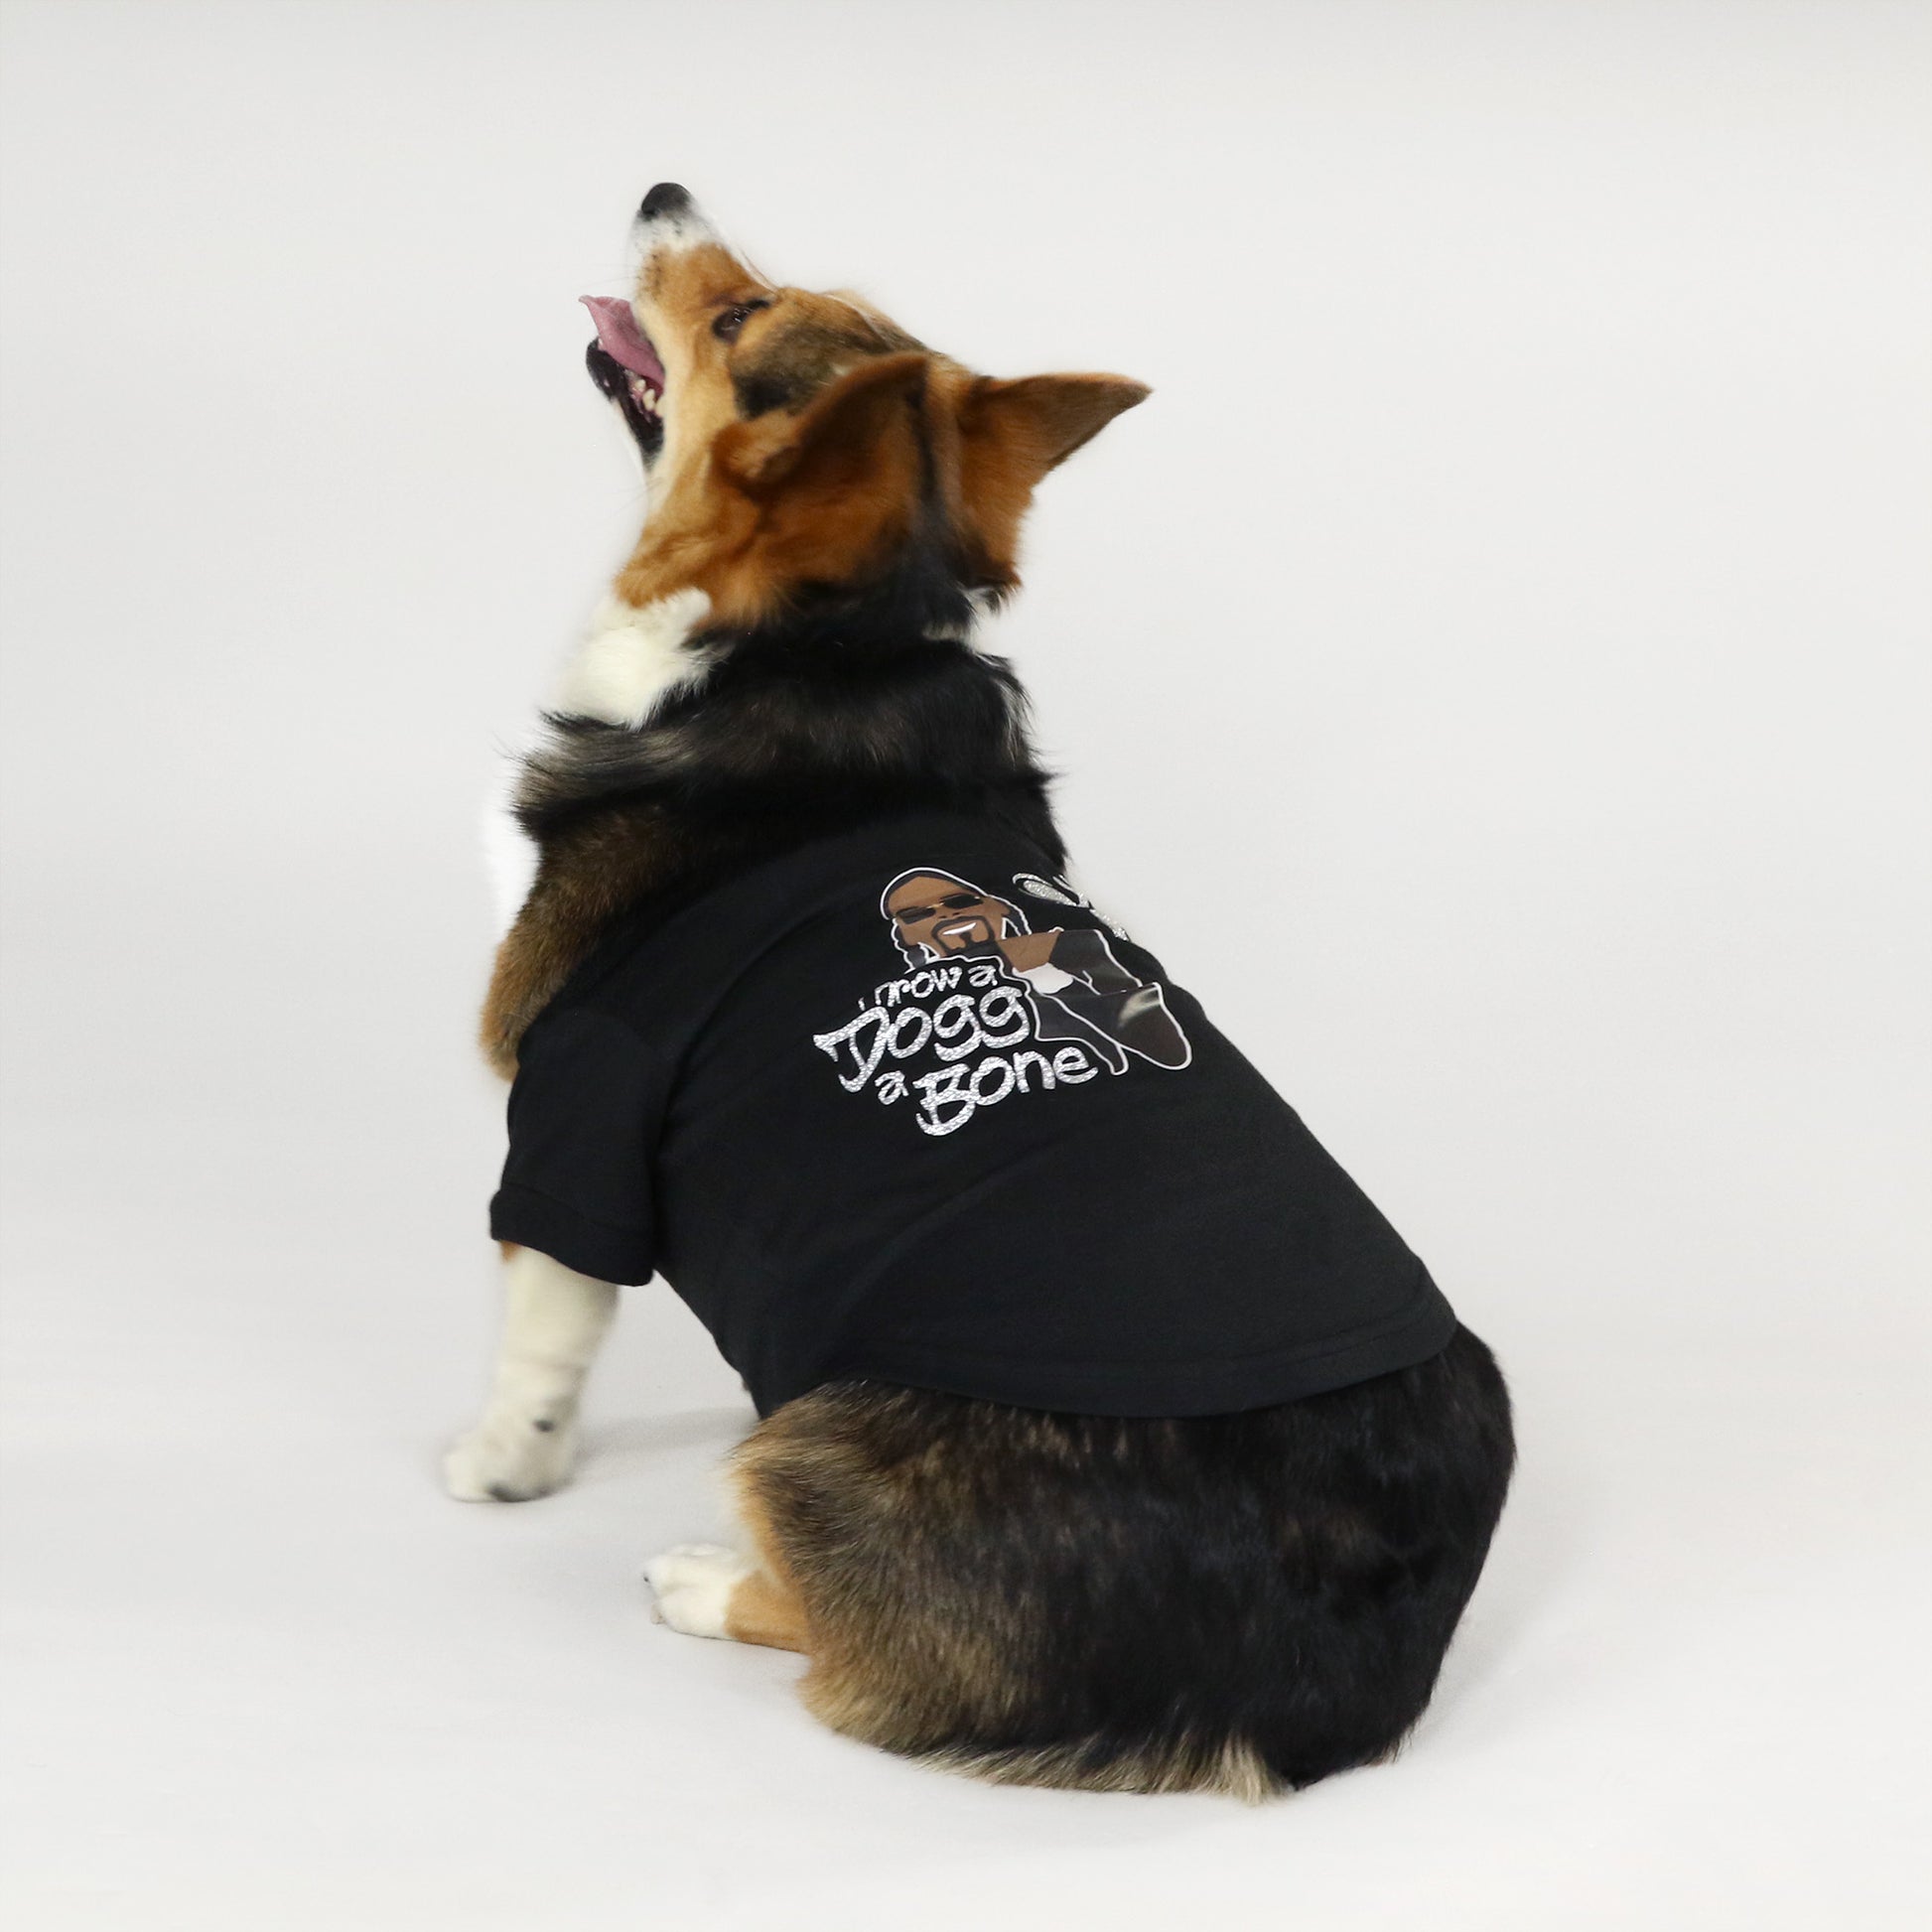 Sunny the Corgi wearing the Throw A Dogg A Bone Deluxe Pet T-Shirt in size Large.